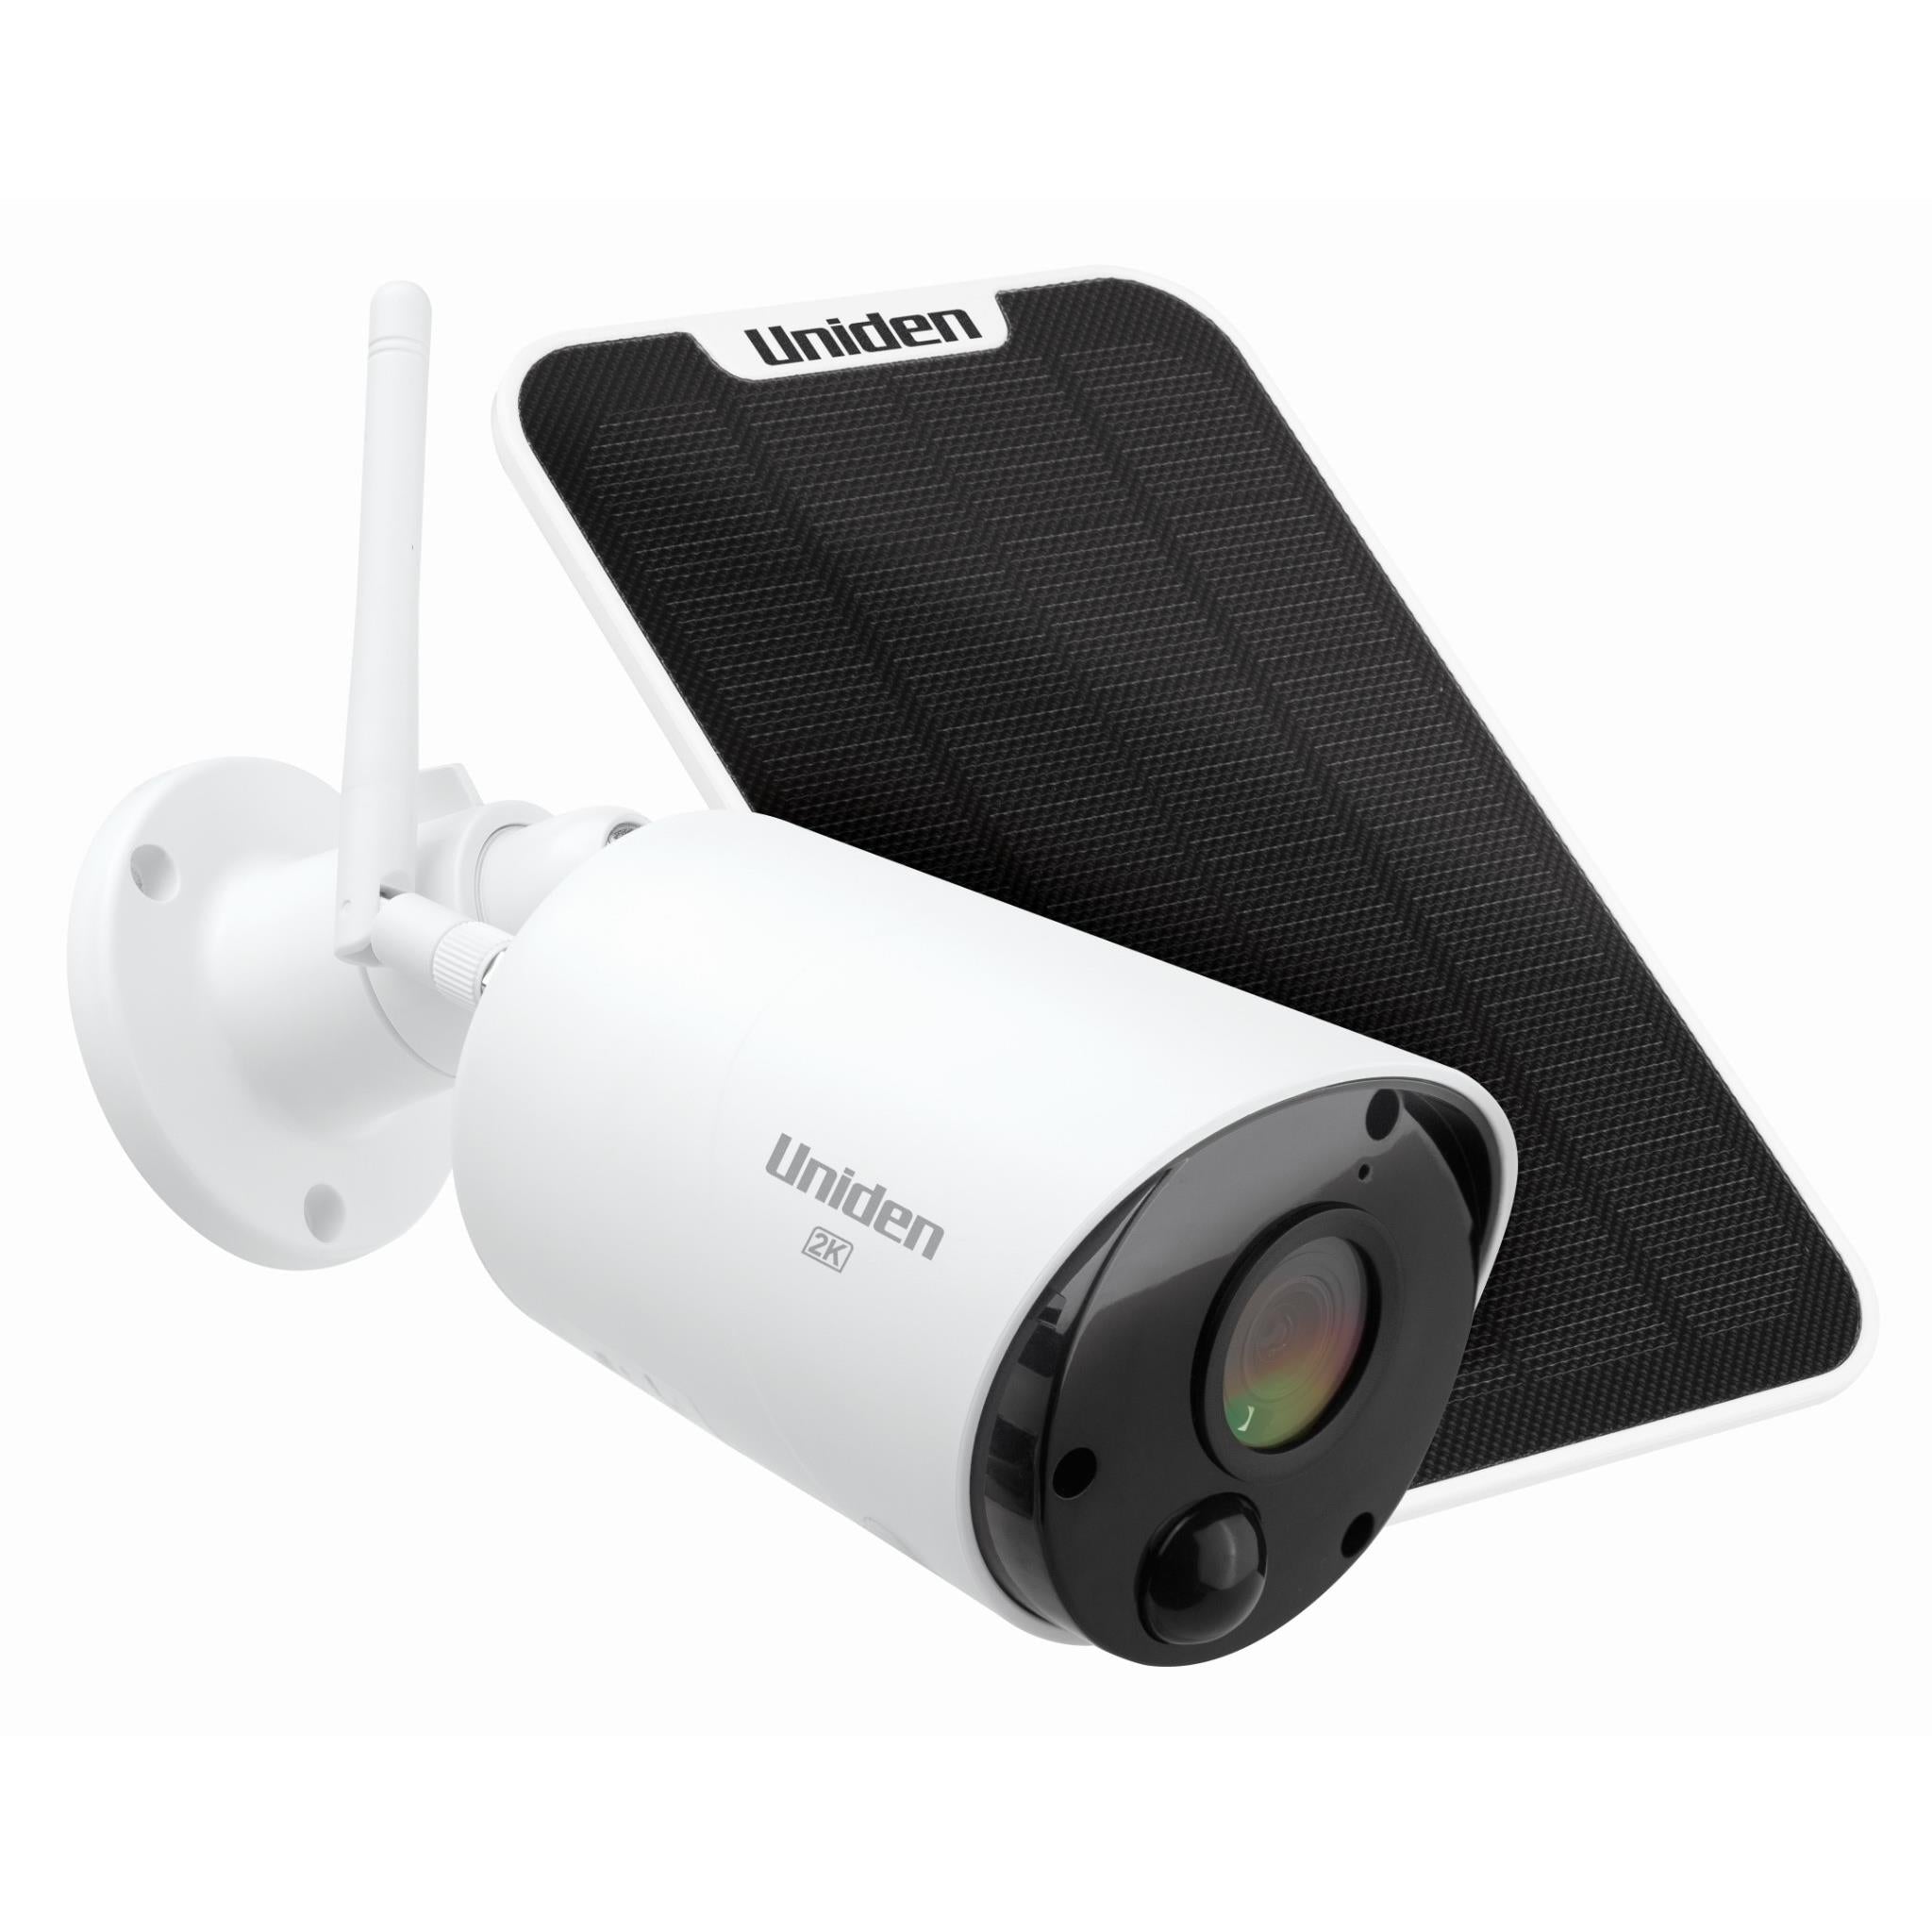 uniden solo 2k bullet wireless security camera with solar panel